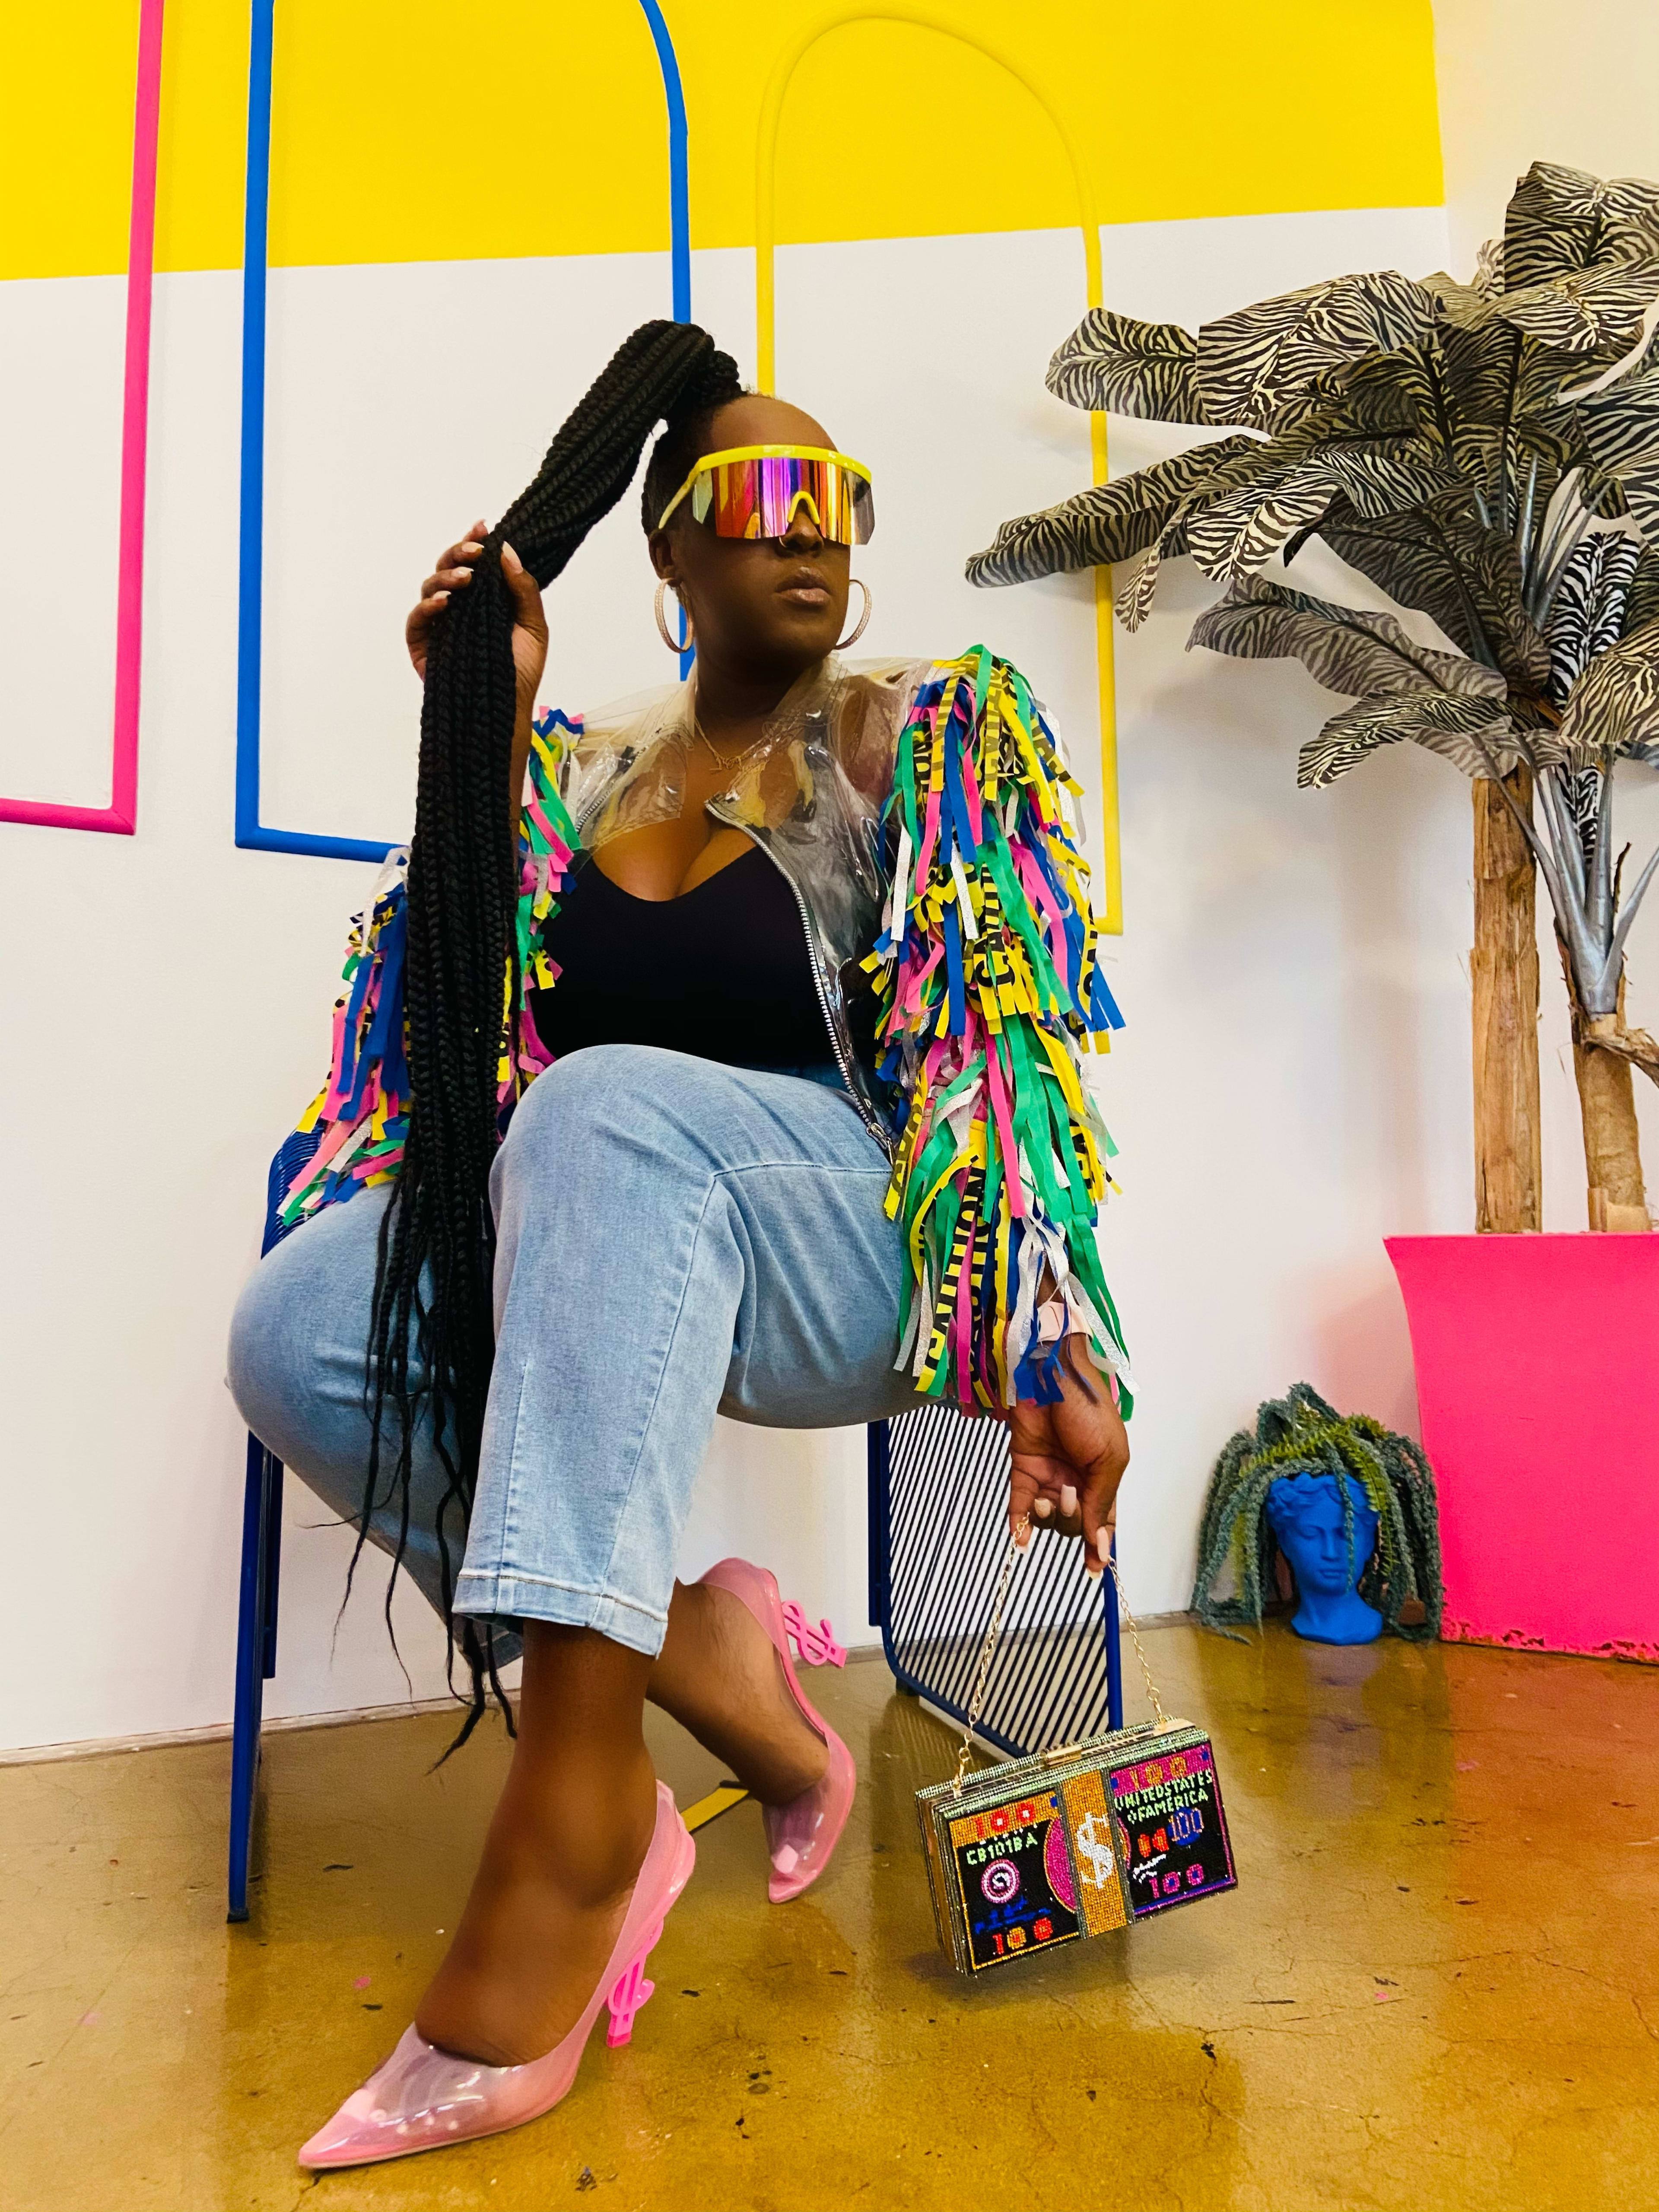 A fashion photoshoot featuring a woman seated in a chair wearing neon sunglasses.